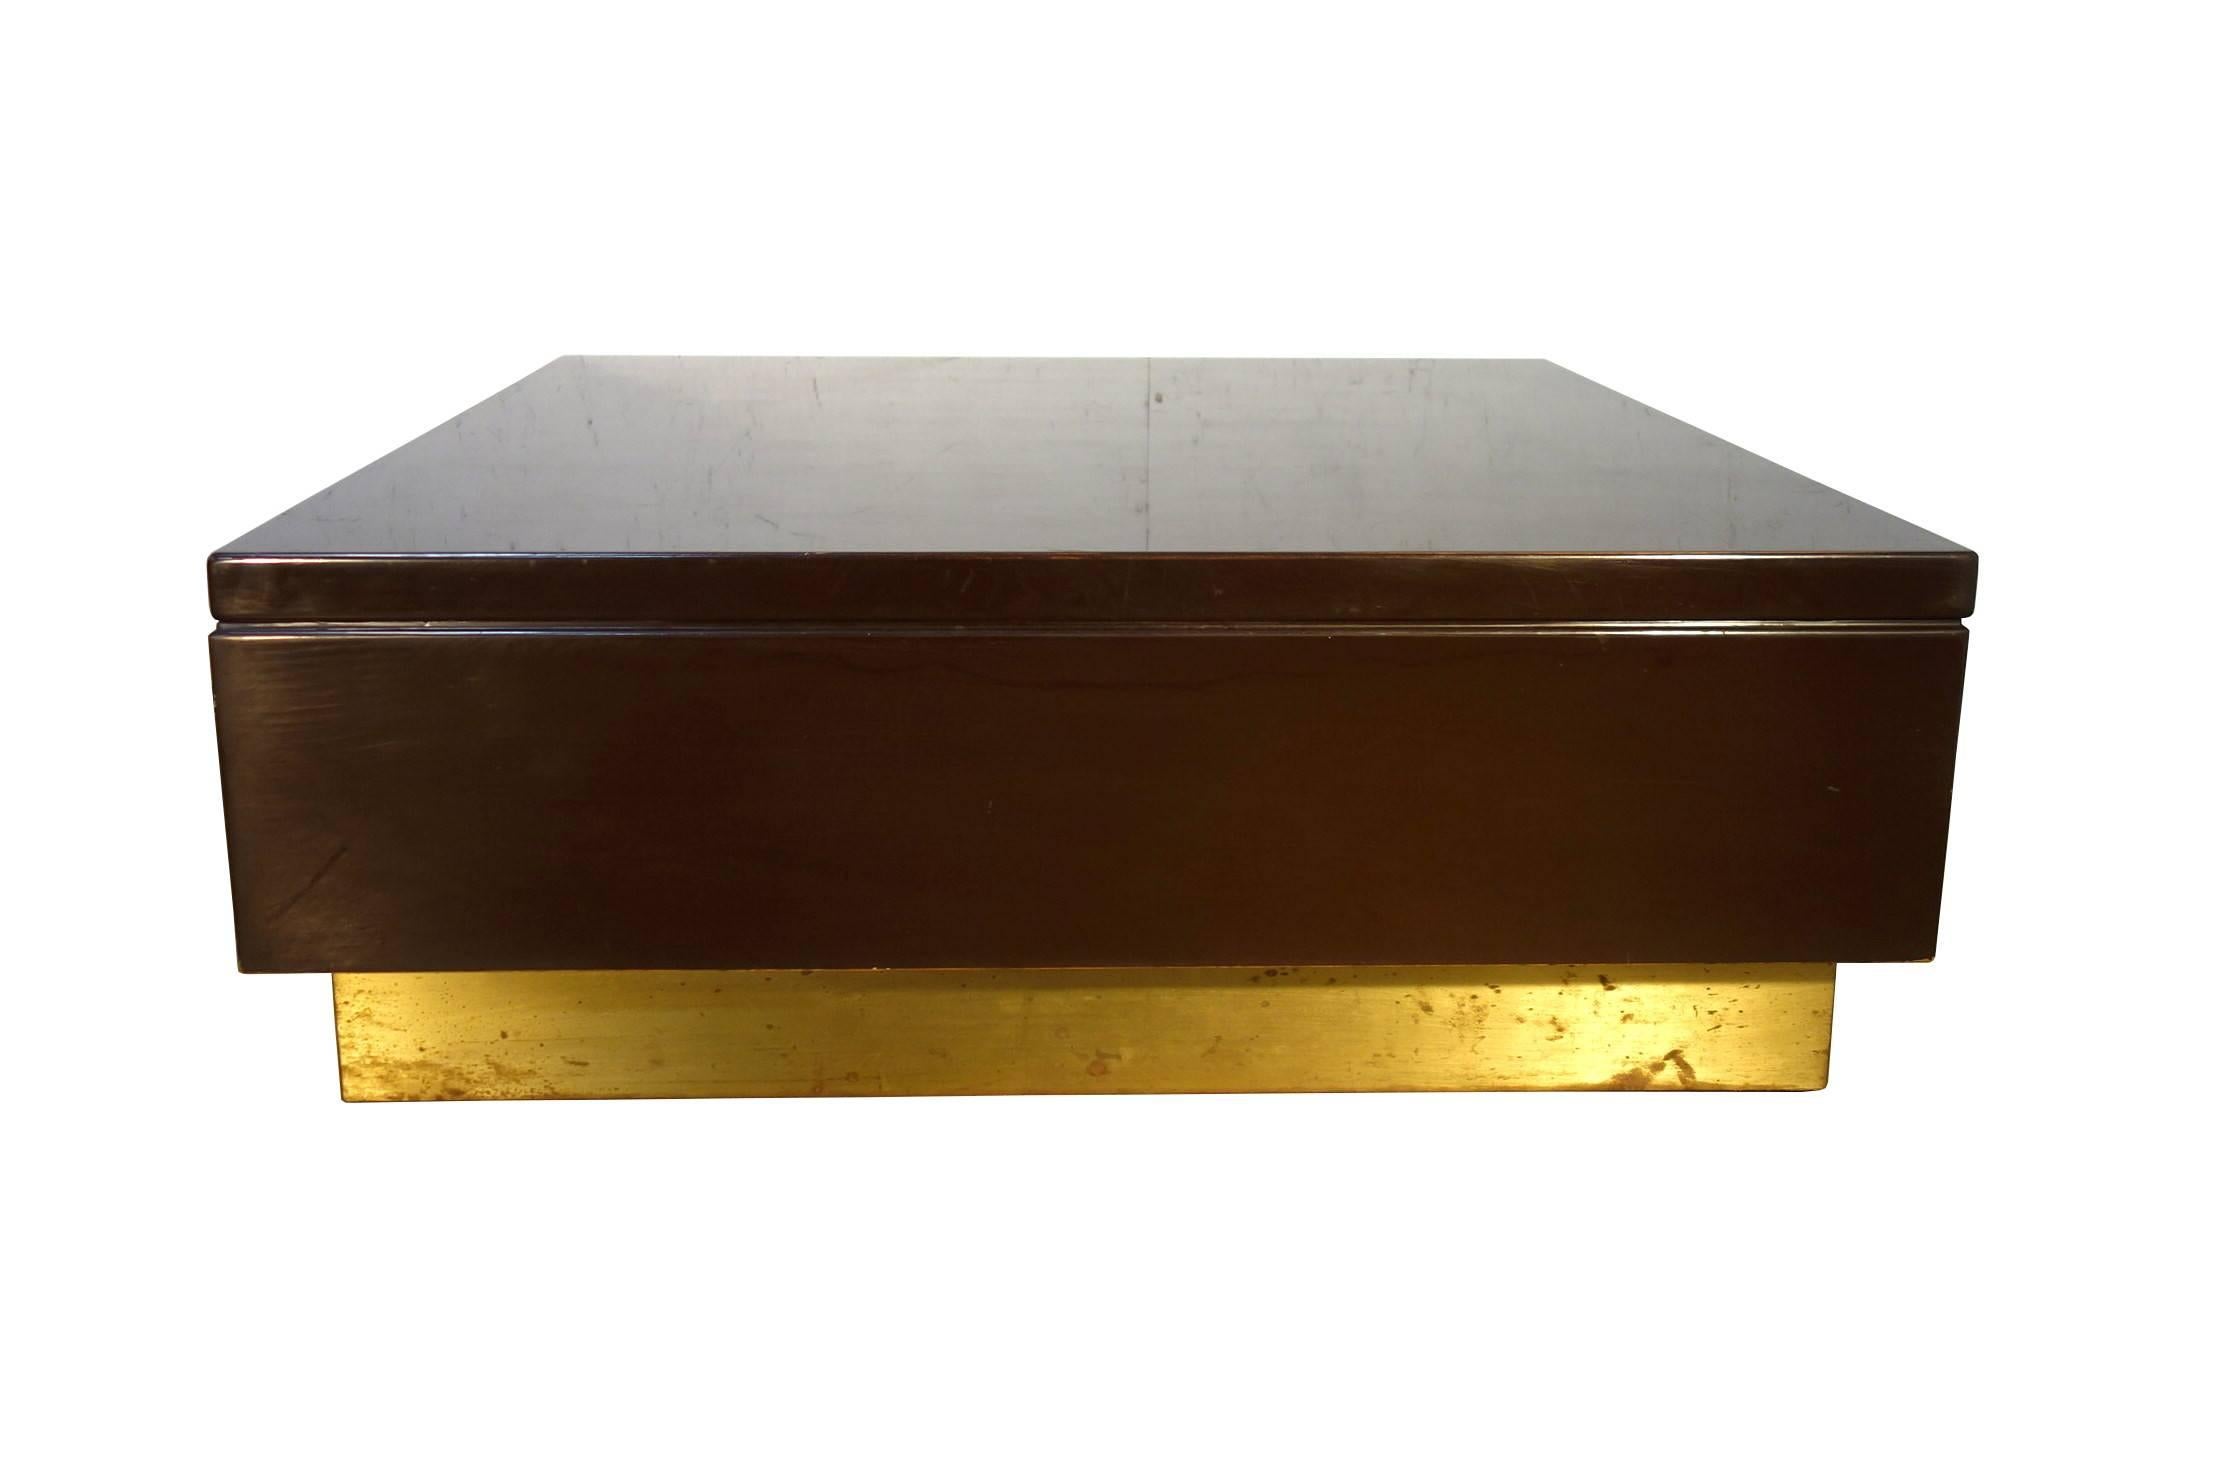 One of a beautiful set of two Italian design contemporary occasional tables 1970s. A square chocolate color lacquered plywood occasional table on a base of brass plates. Beautifully minimalistic with a metallic accent. This table with compliment a